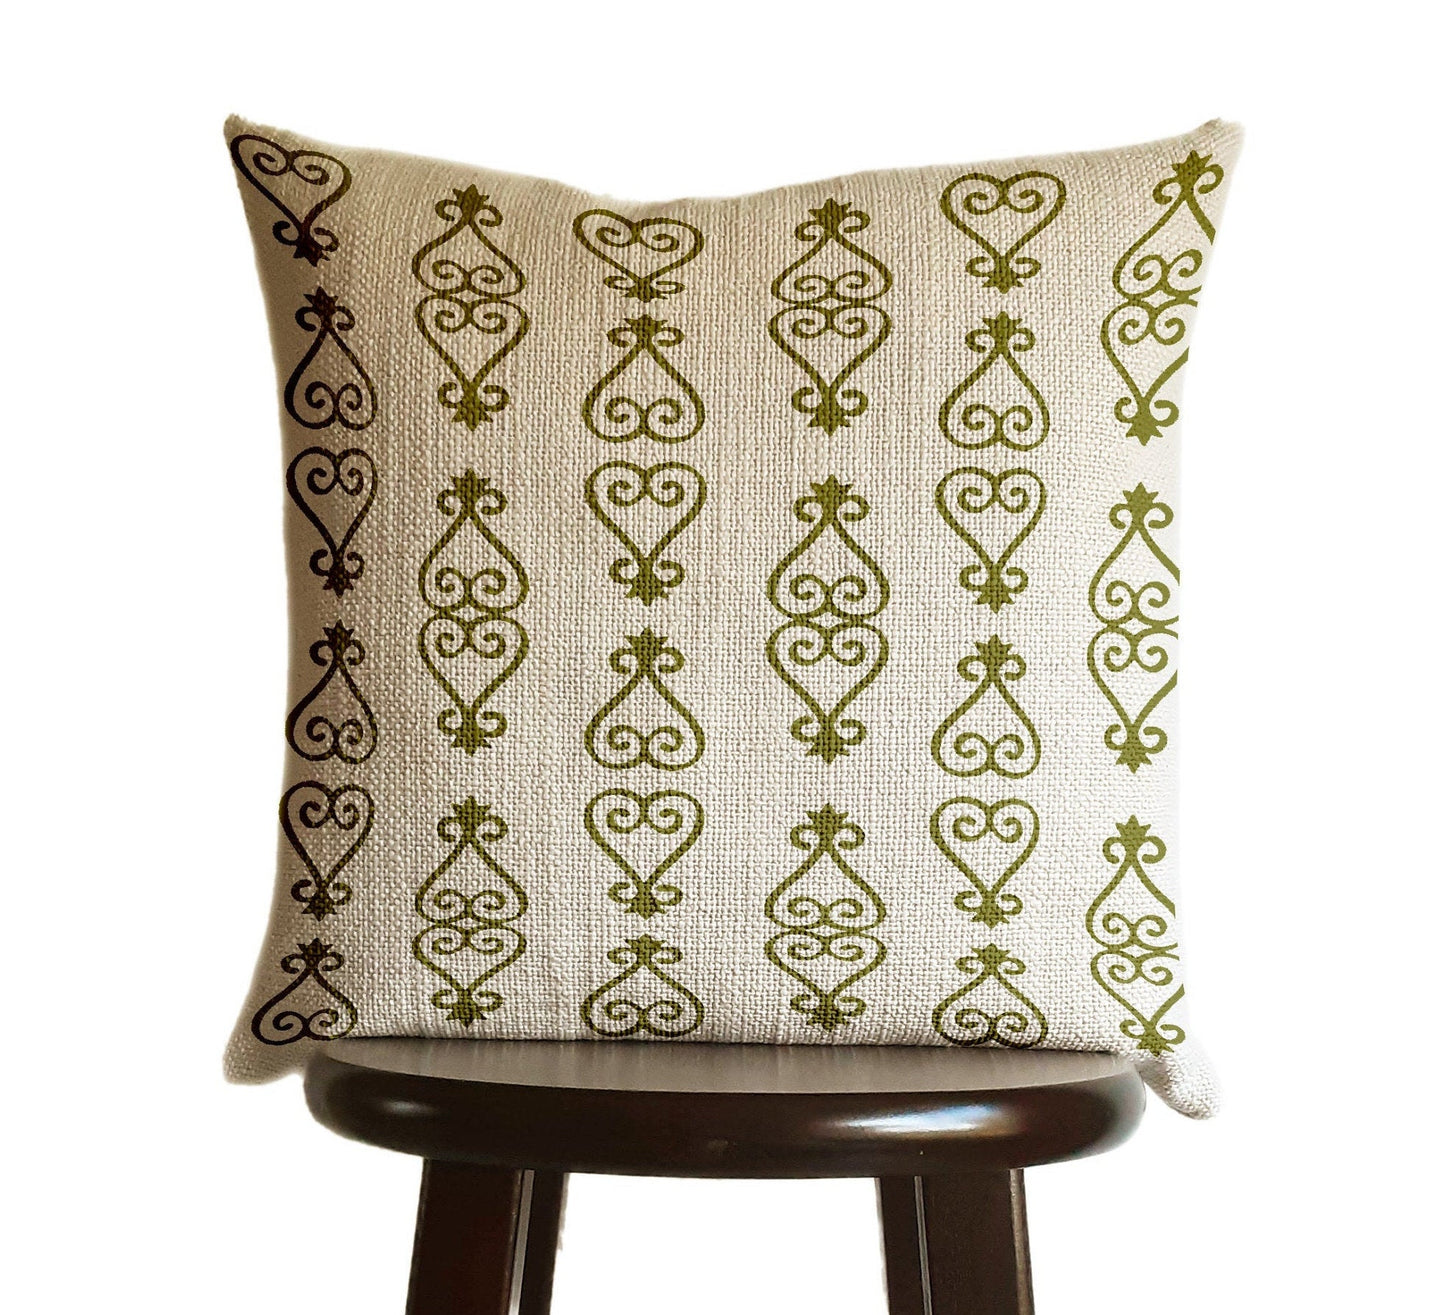 Moss Olive Green Pillow Cover, Tribal Urban Ethnic Square 18x18 in